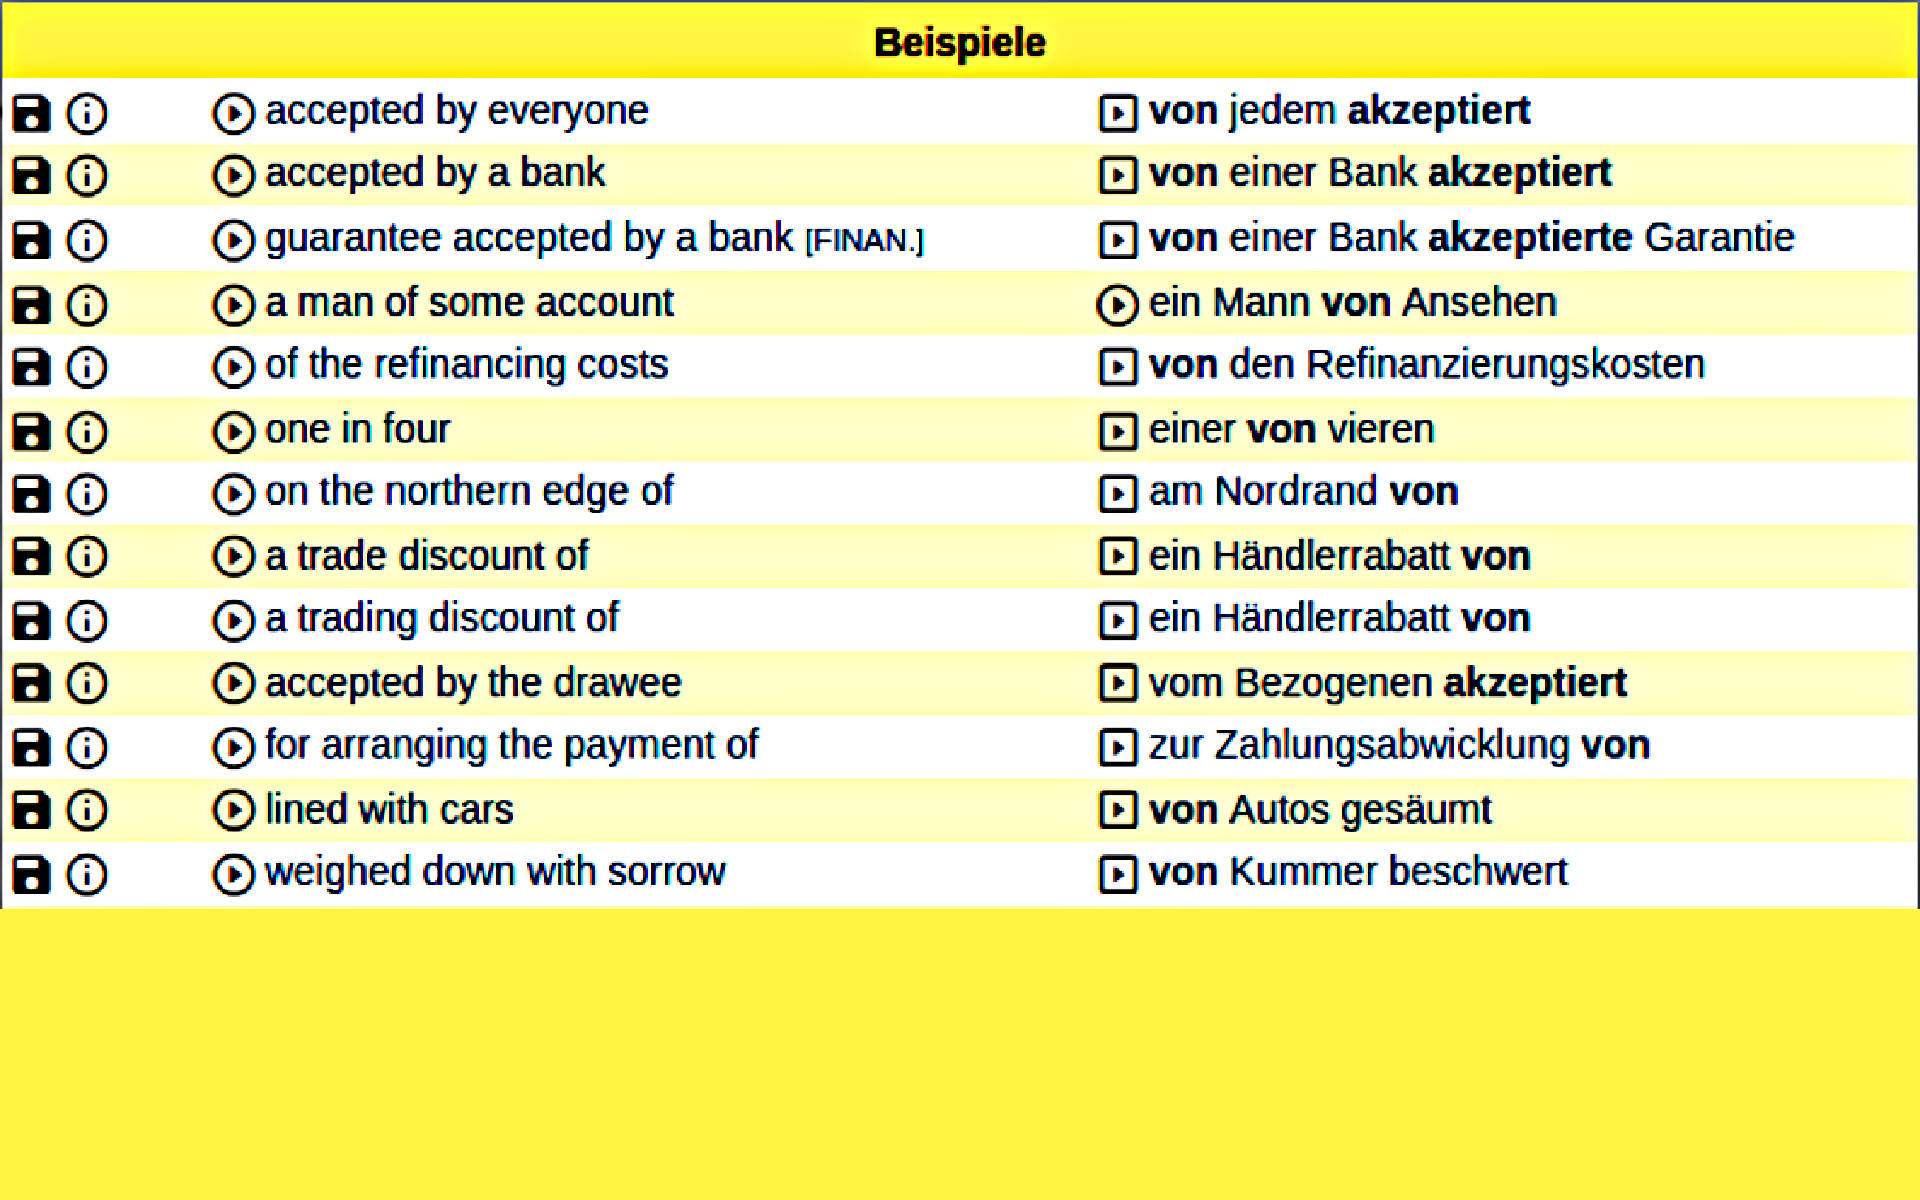 examples from an english-german dictionary, acceptance seems to be an economic thing